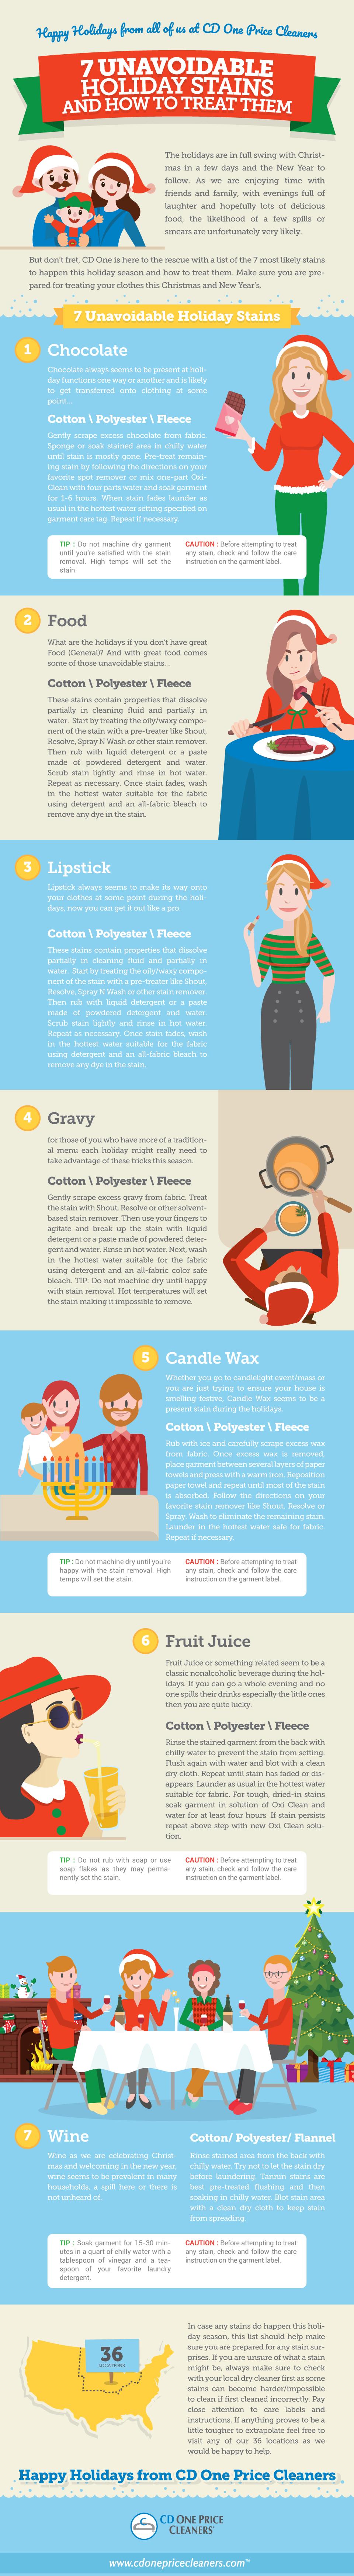 Tips for stain removal to keep your holidays merry and stain-free! 